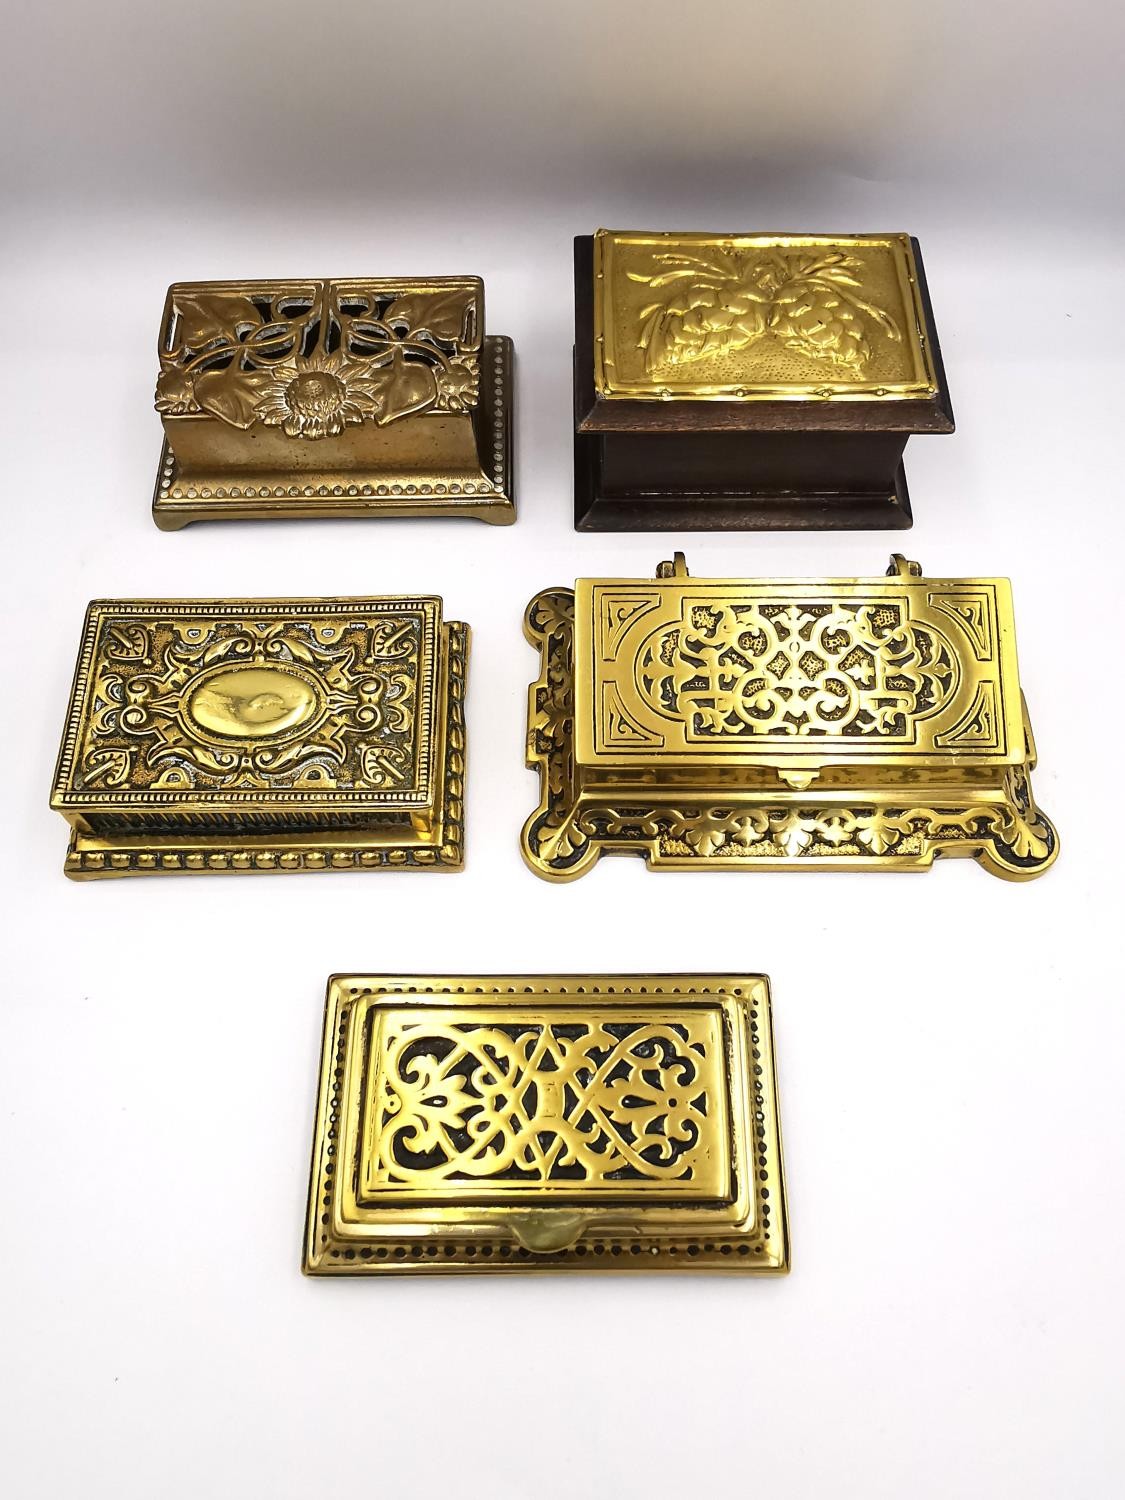 A collection of five 19th century and early 20th century brass stamp boxes, including one with a